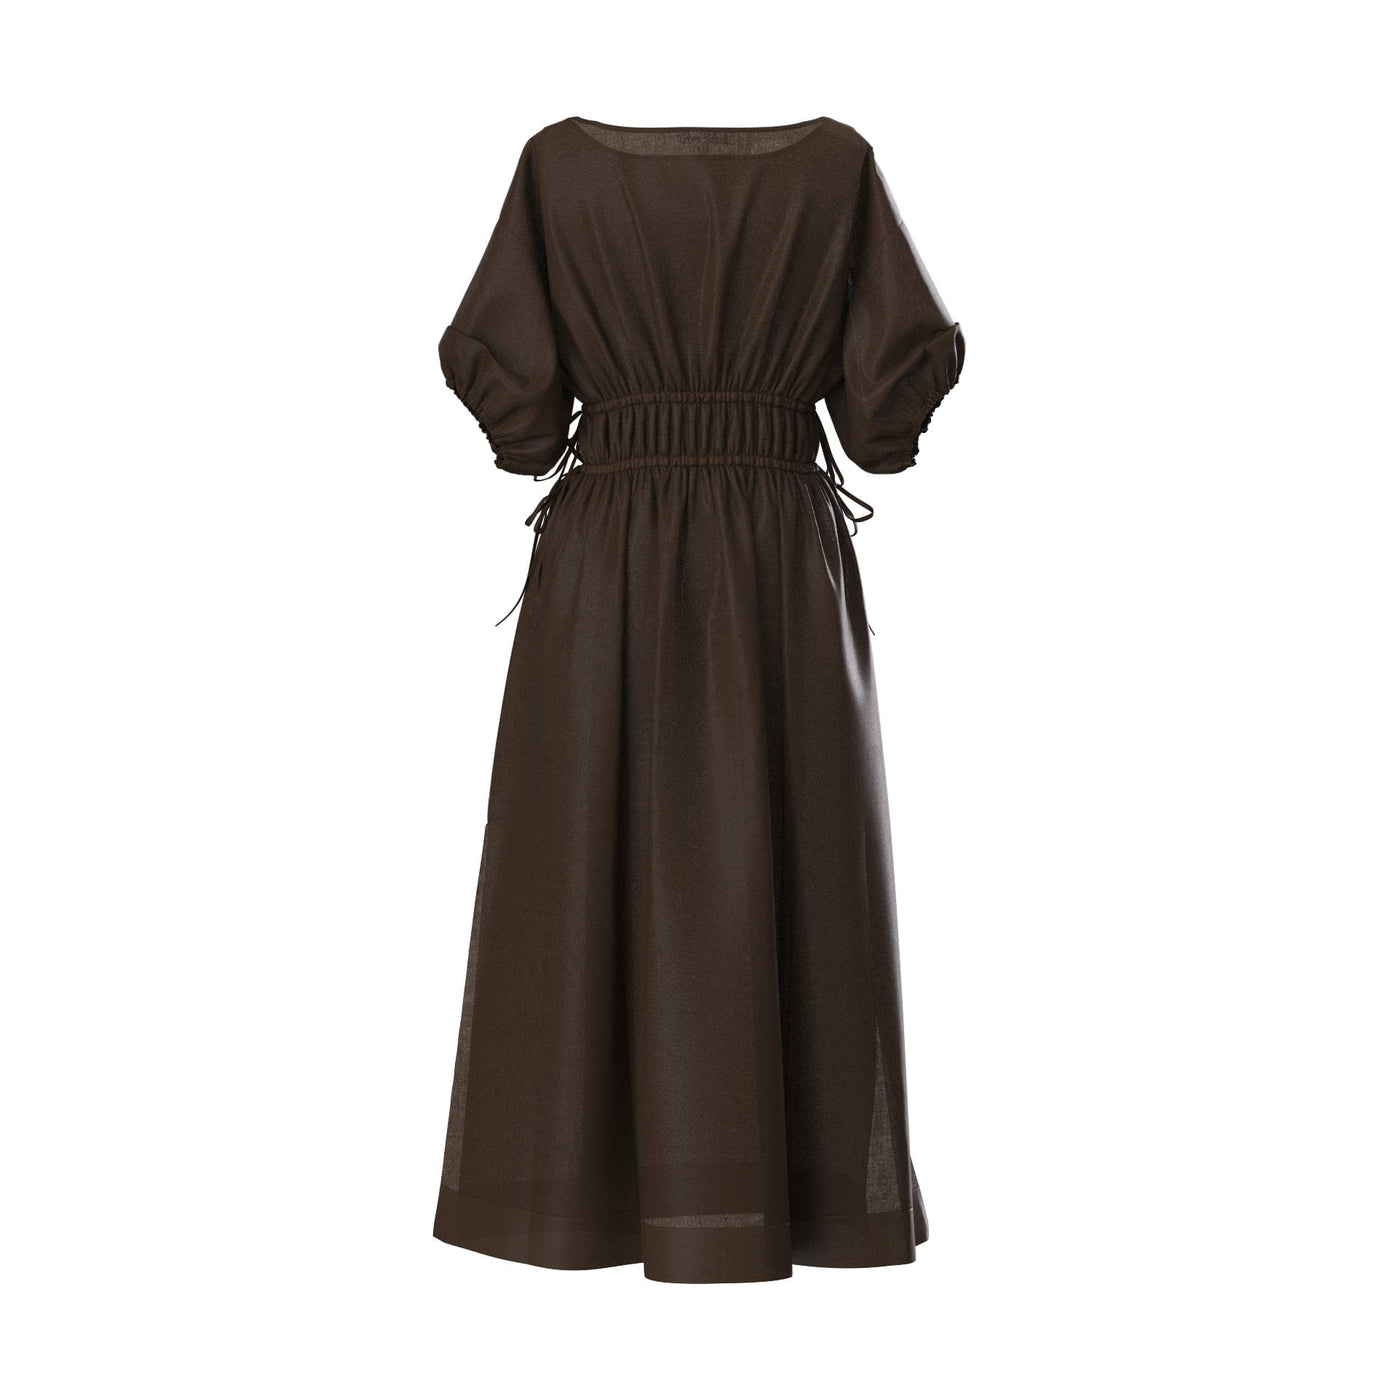 Lilly Pilly Collection Valerie dress made from 100% Organic linen in Chocolate, as 3D model showing back view